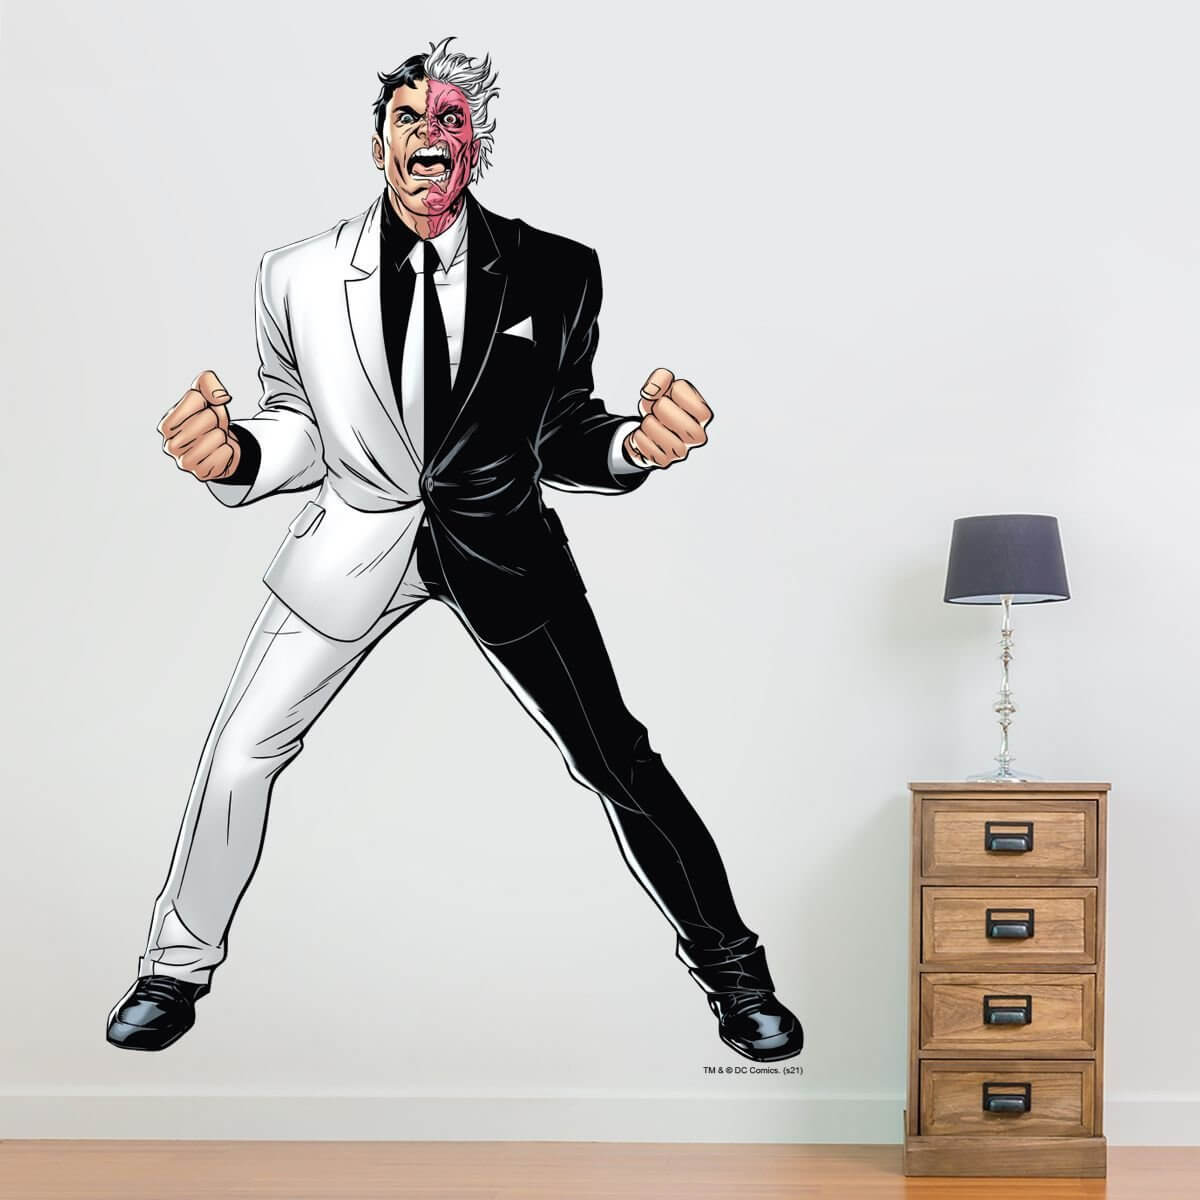 Kismet Decals Two-Face Crime Boss Licensed Wall Sticker - Easy DIY Justice League Home & Room Decor Wall Art - Kismet Decals